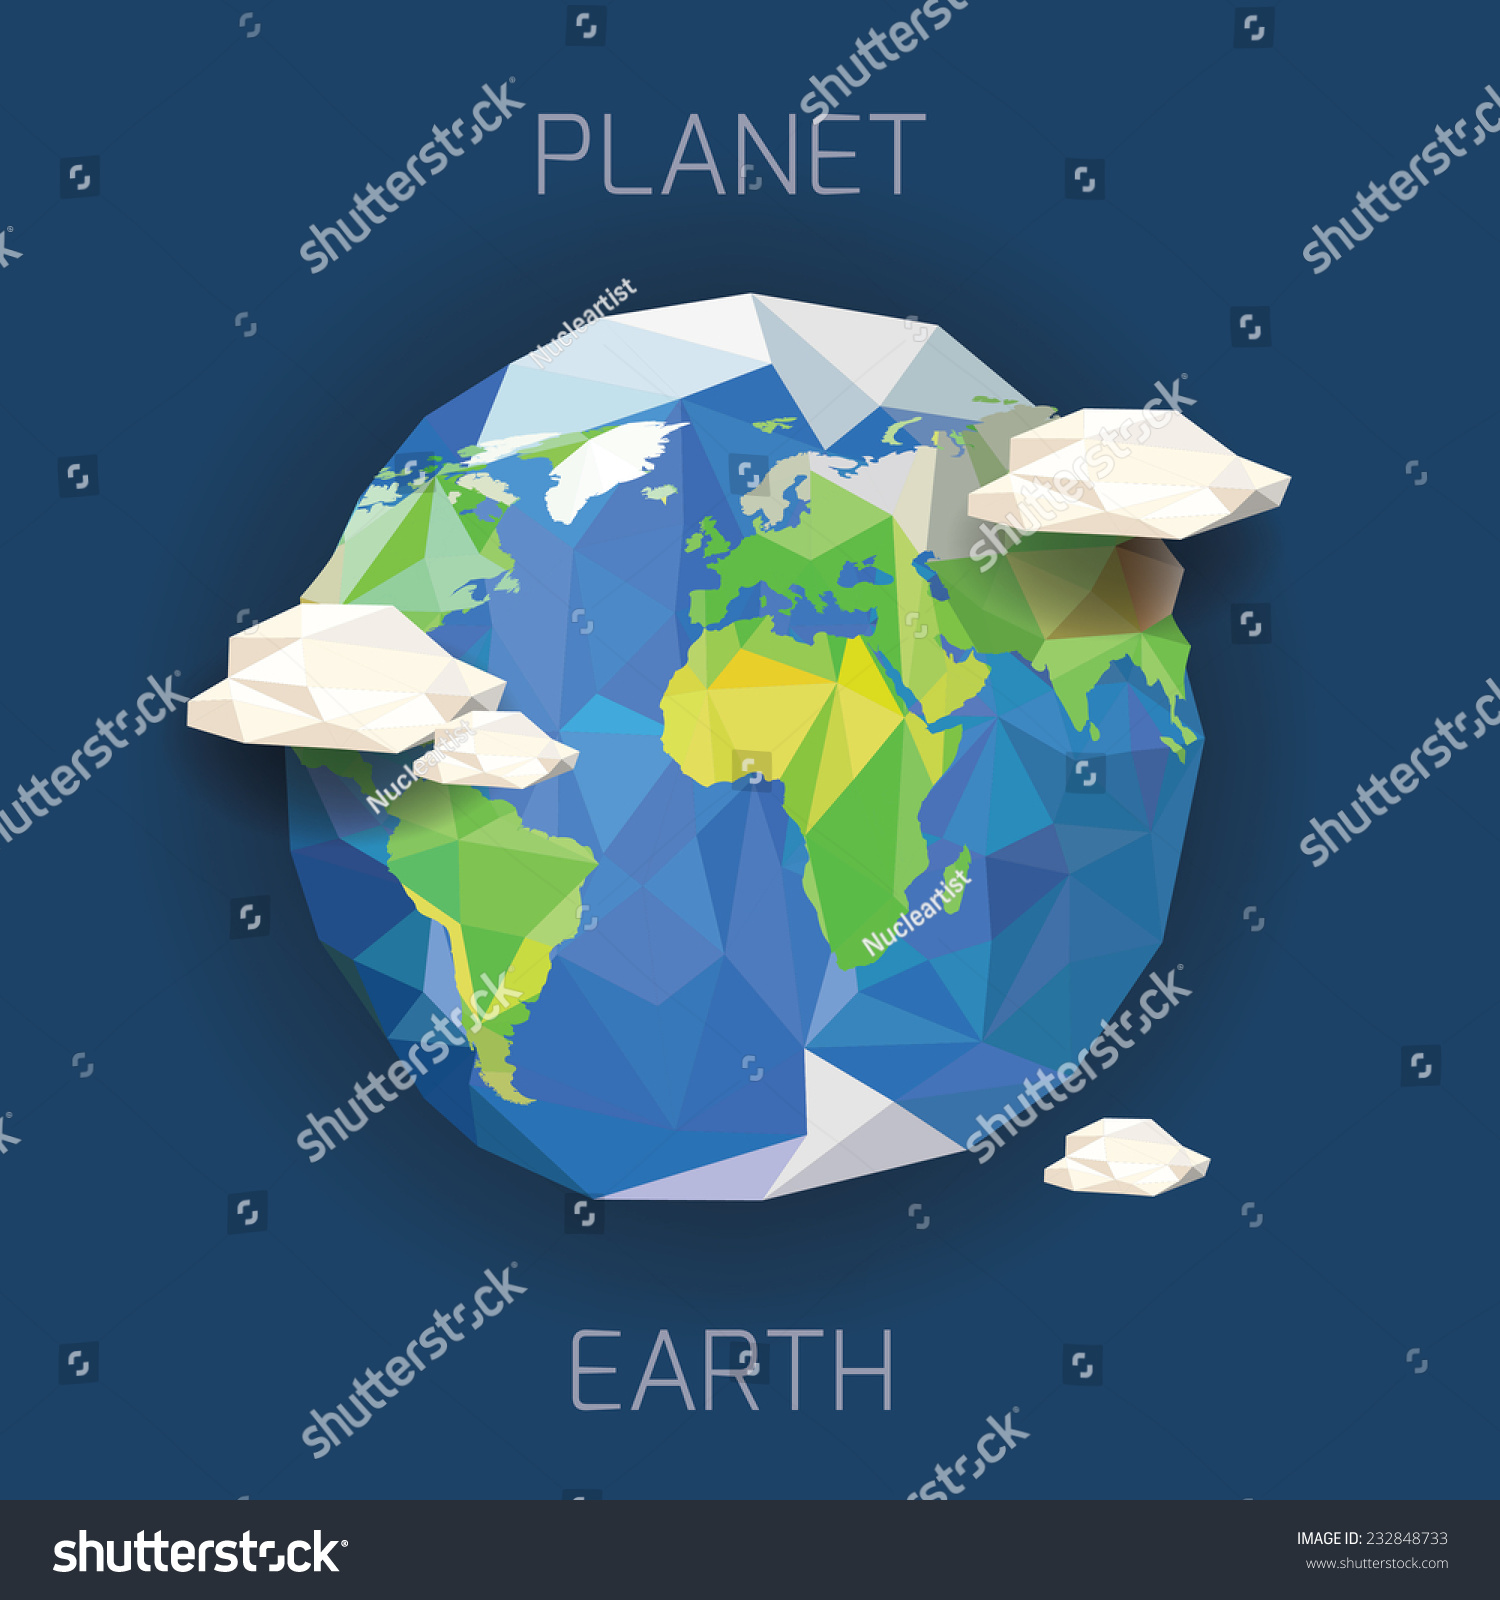 Low Poly Planet Earth.Vector Illustration - 232848733 : Shutterstock